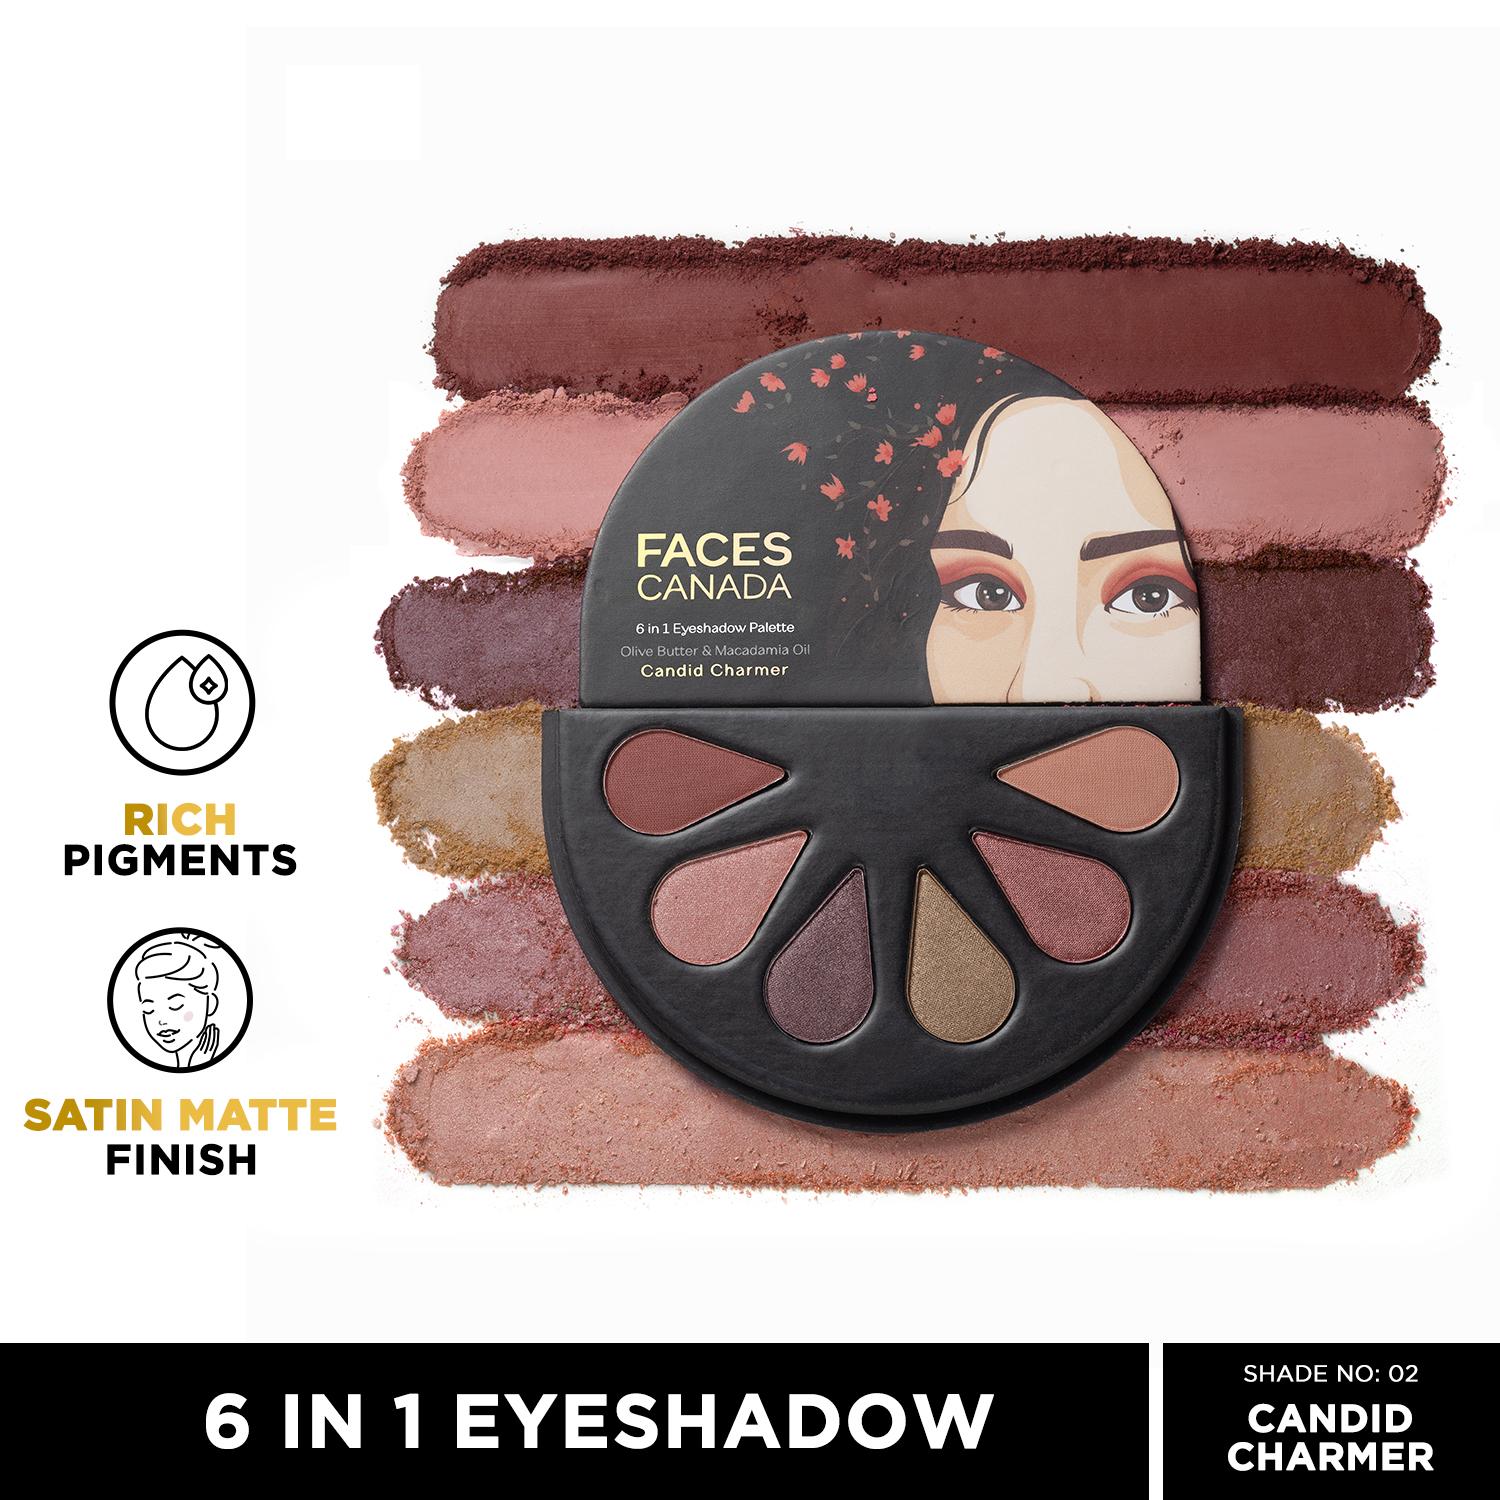 Faces Canada | Faces Canada 6-In-1 Eyeshadow Palette - 02 Candid Charmer (6g)